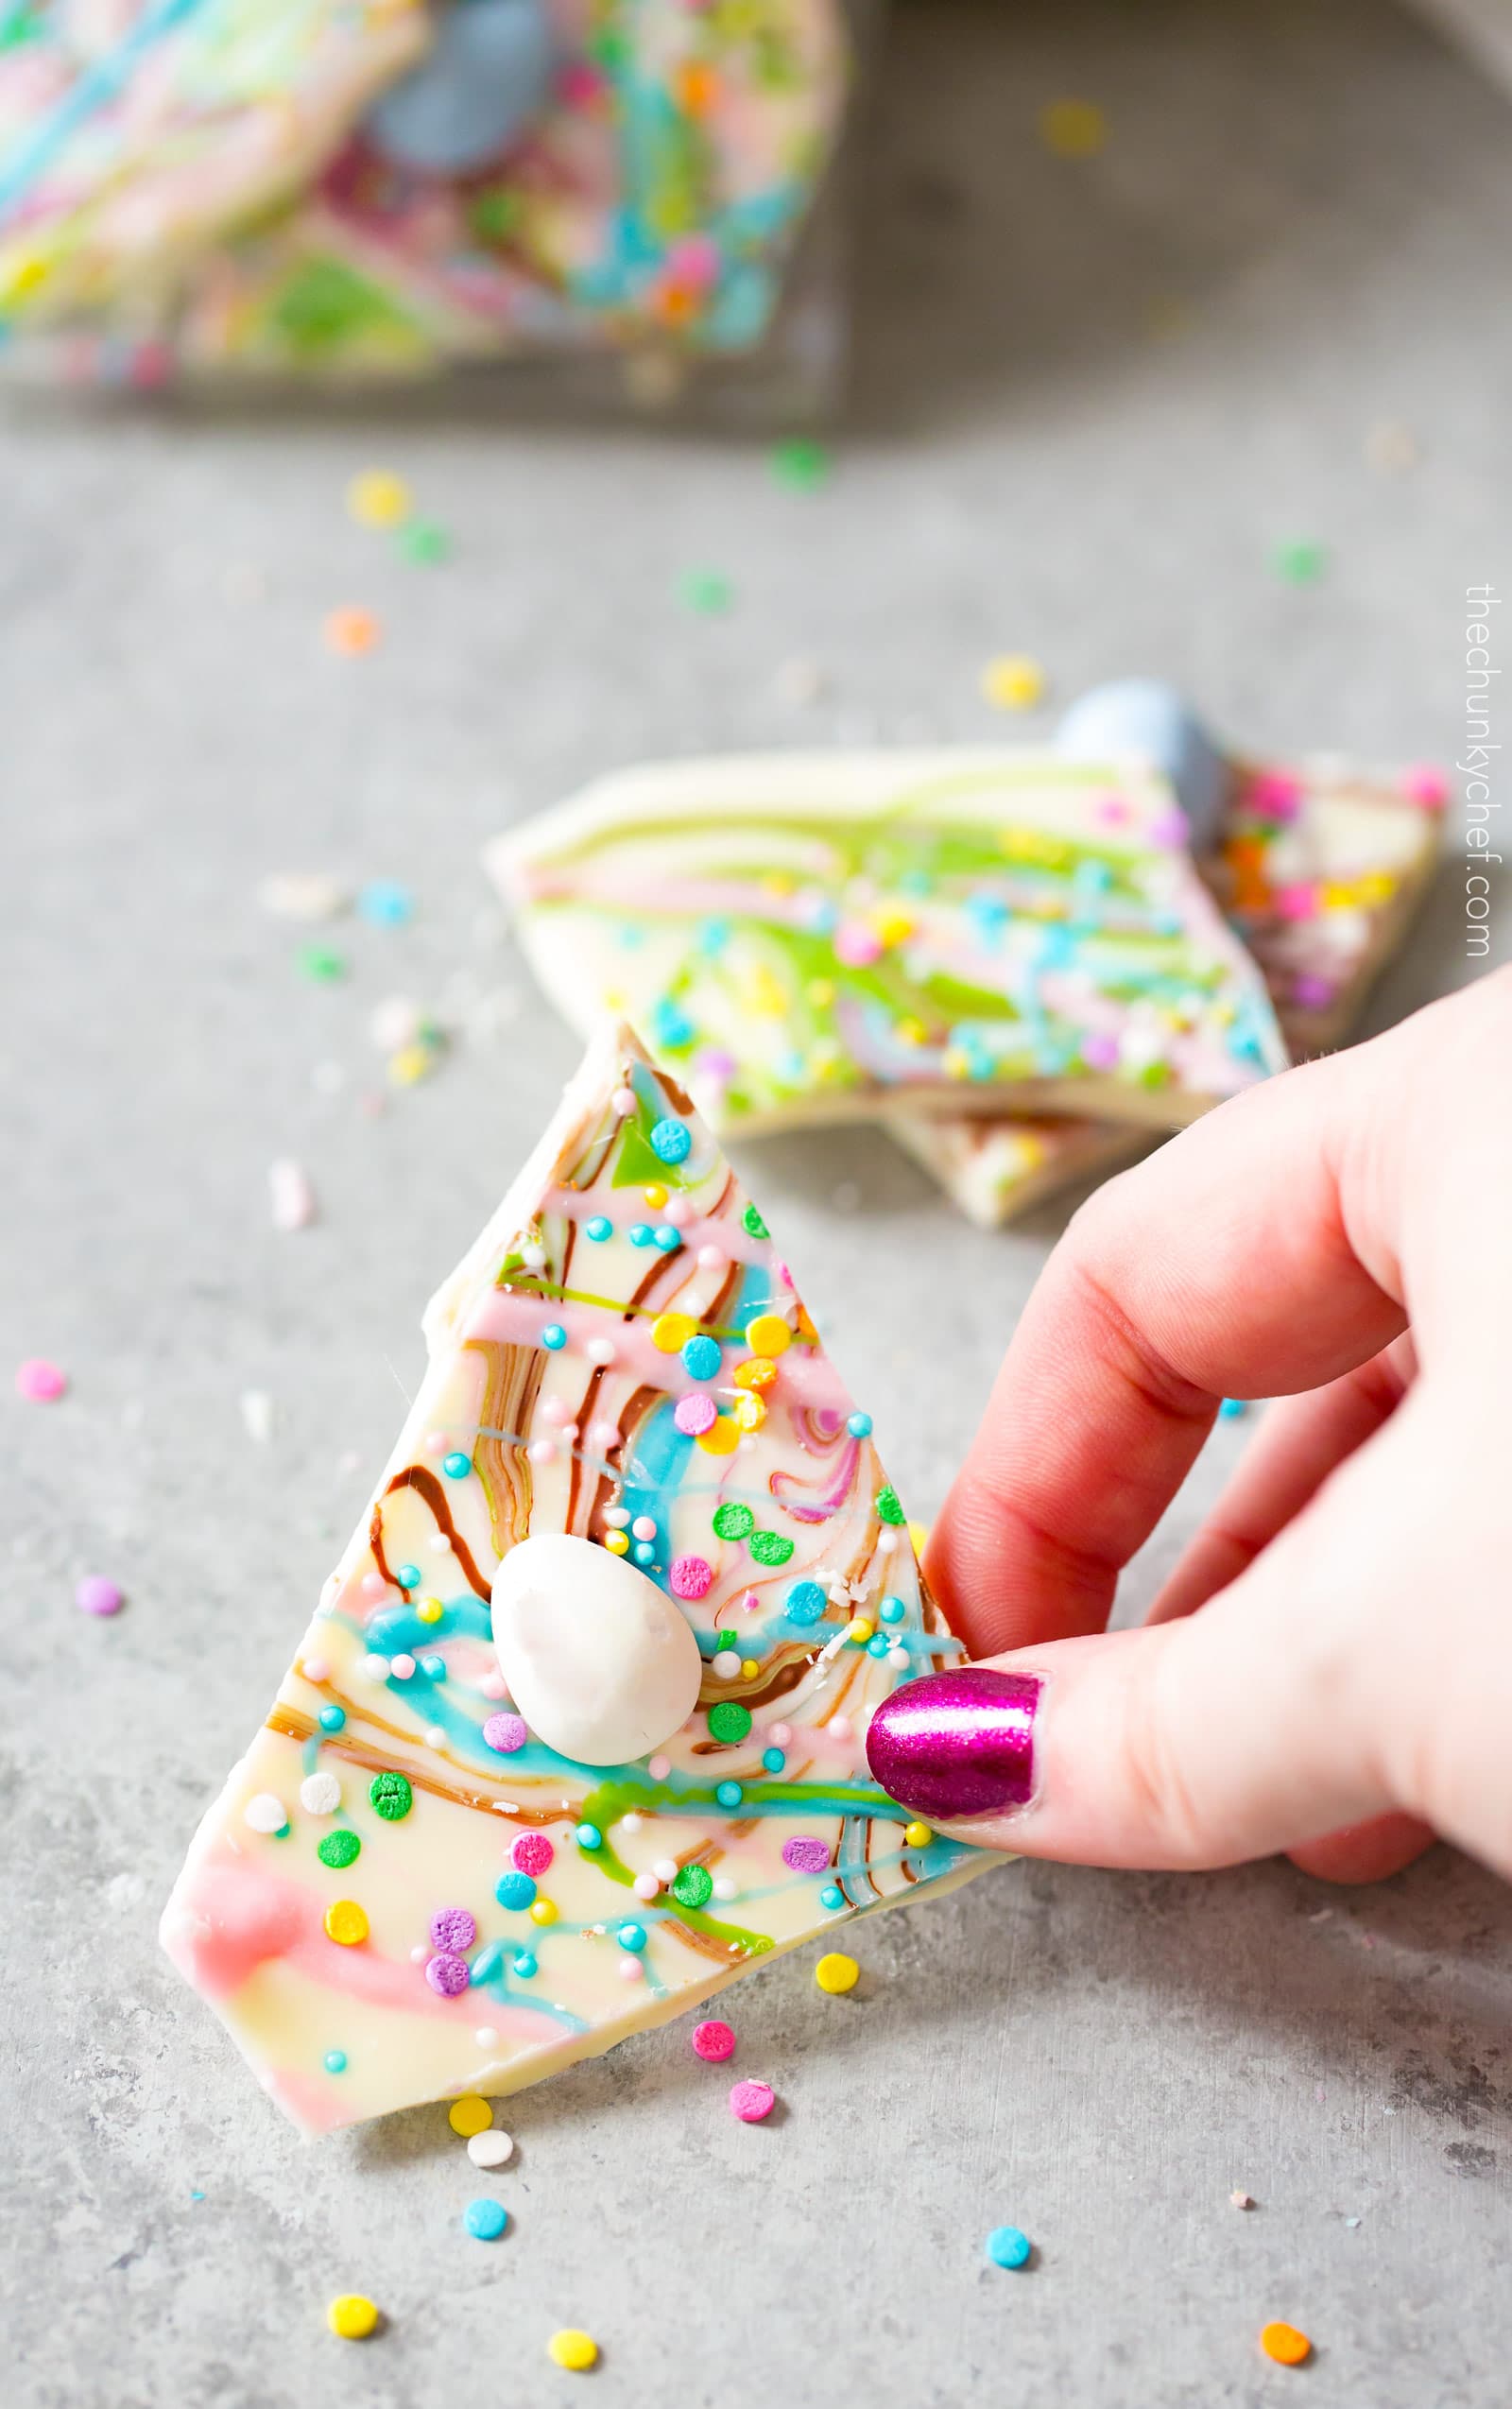 Brownie Batter White Chocolate Bark | A fun no bake bark dessert, made with white chocolate swirled together with milk chocolate brownie batter, and decorated in fun Spring colors! Easily customizable to any holiday and makes a great homemade gift! | http://thechunkychef.com